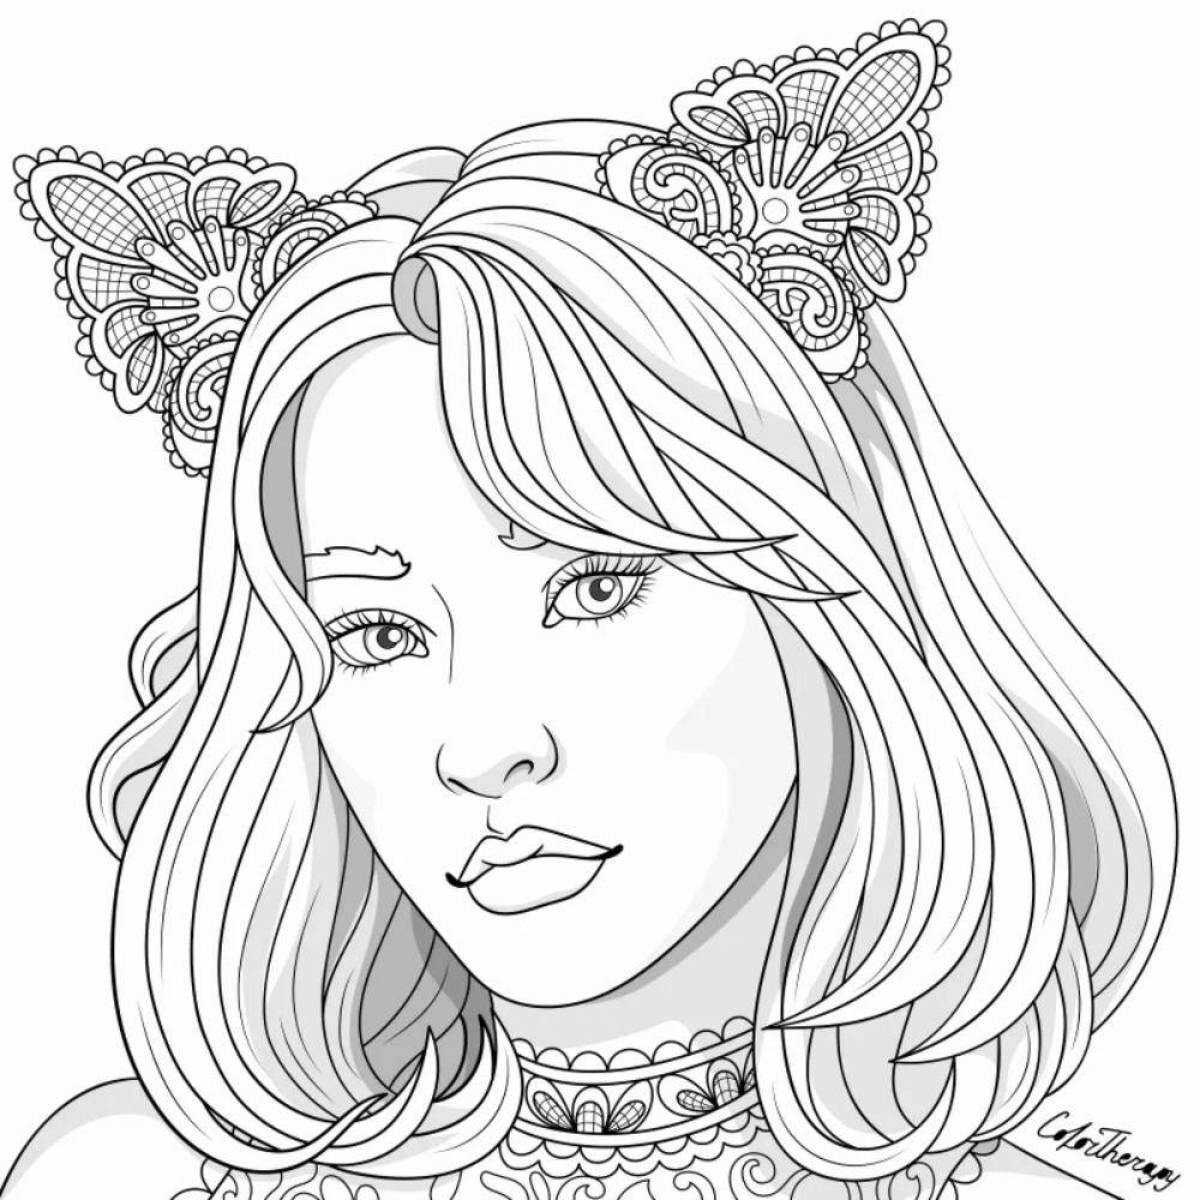 Charming coloring book for girls 14 years old, beautiful